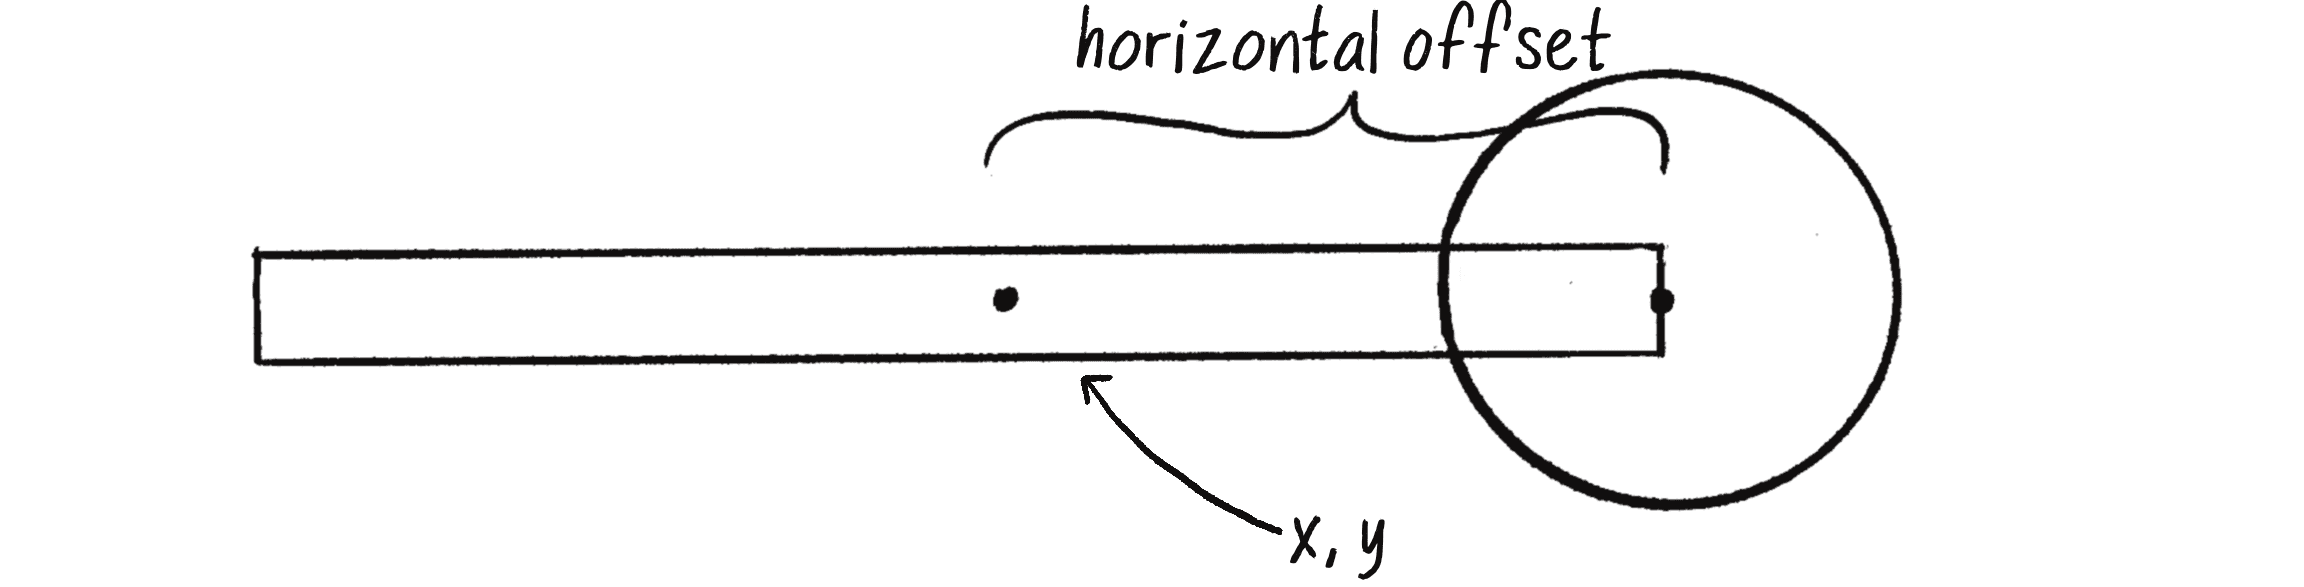 Figure 6.8: A circle placed relative to a rectangle with a horizontal offset